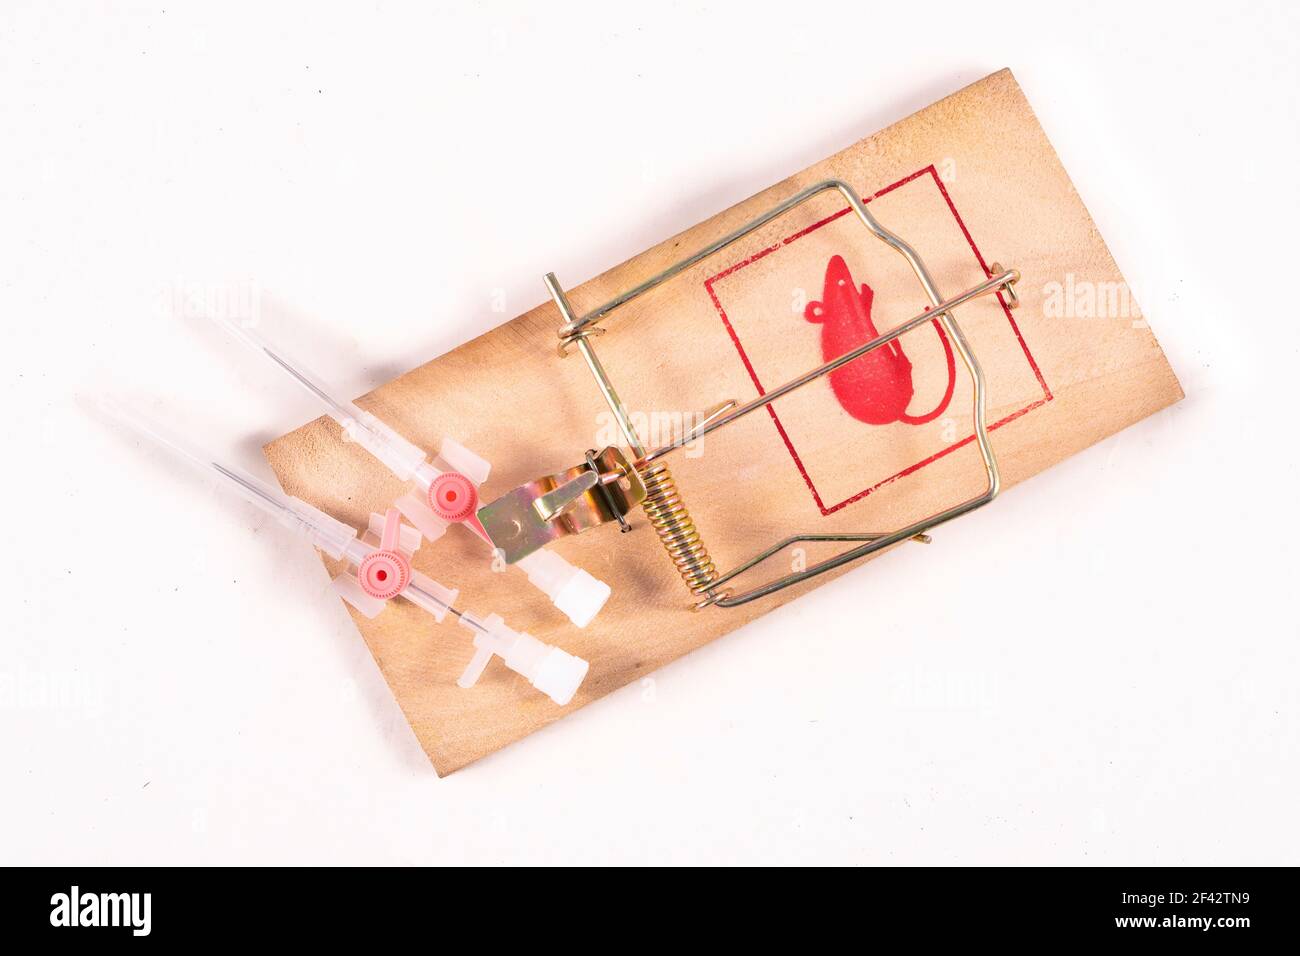 Medical venflon placed in a mousetrap. Medical accessories as a trap for patients. Light background. Stock Photo